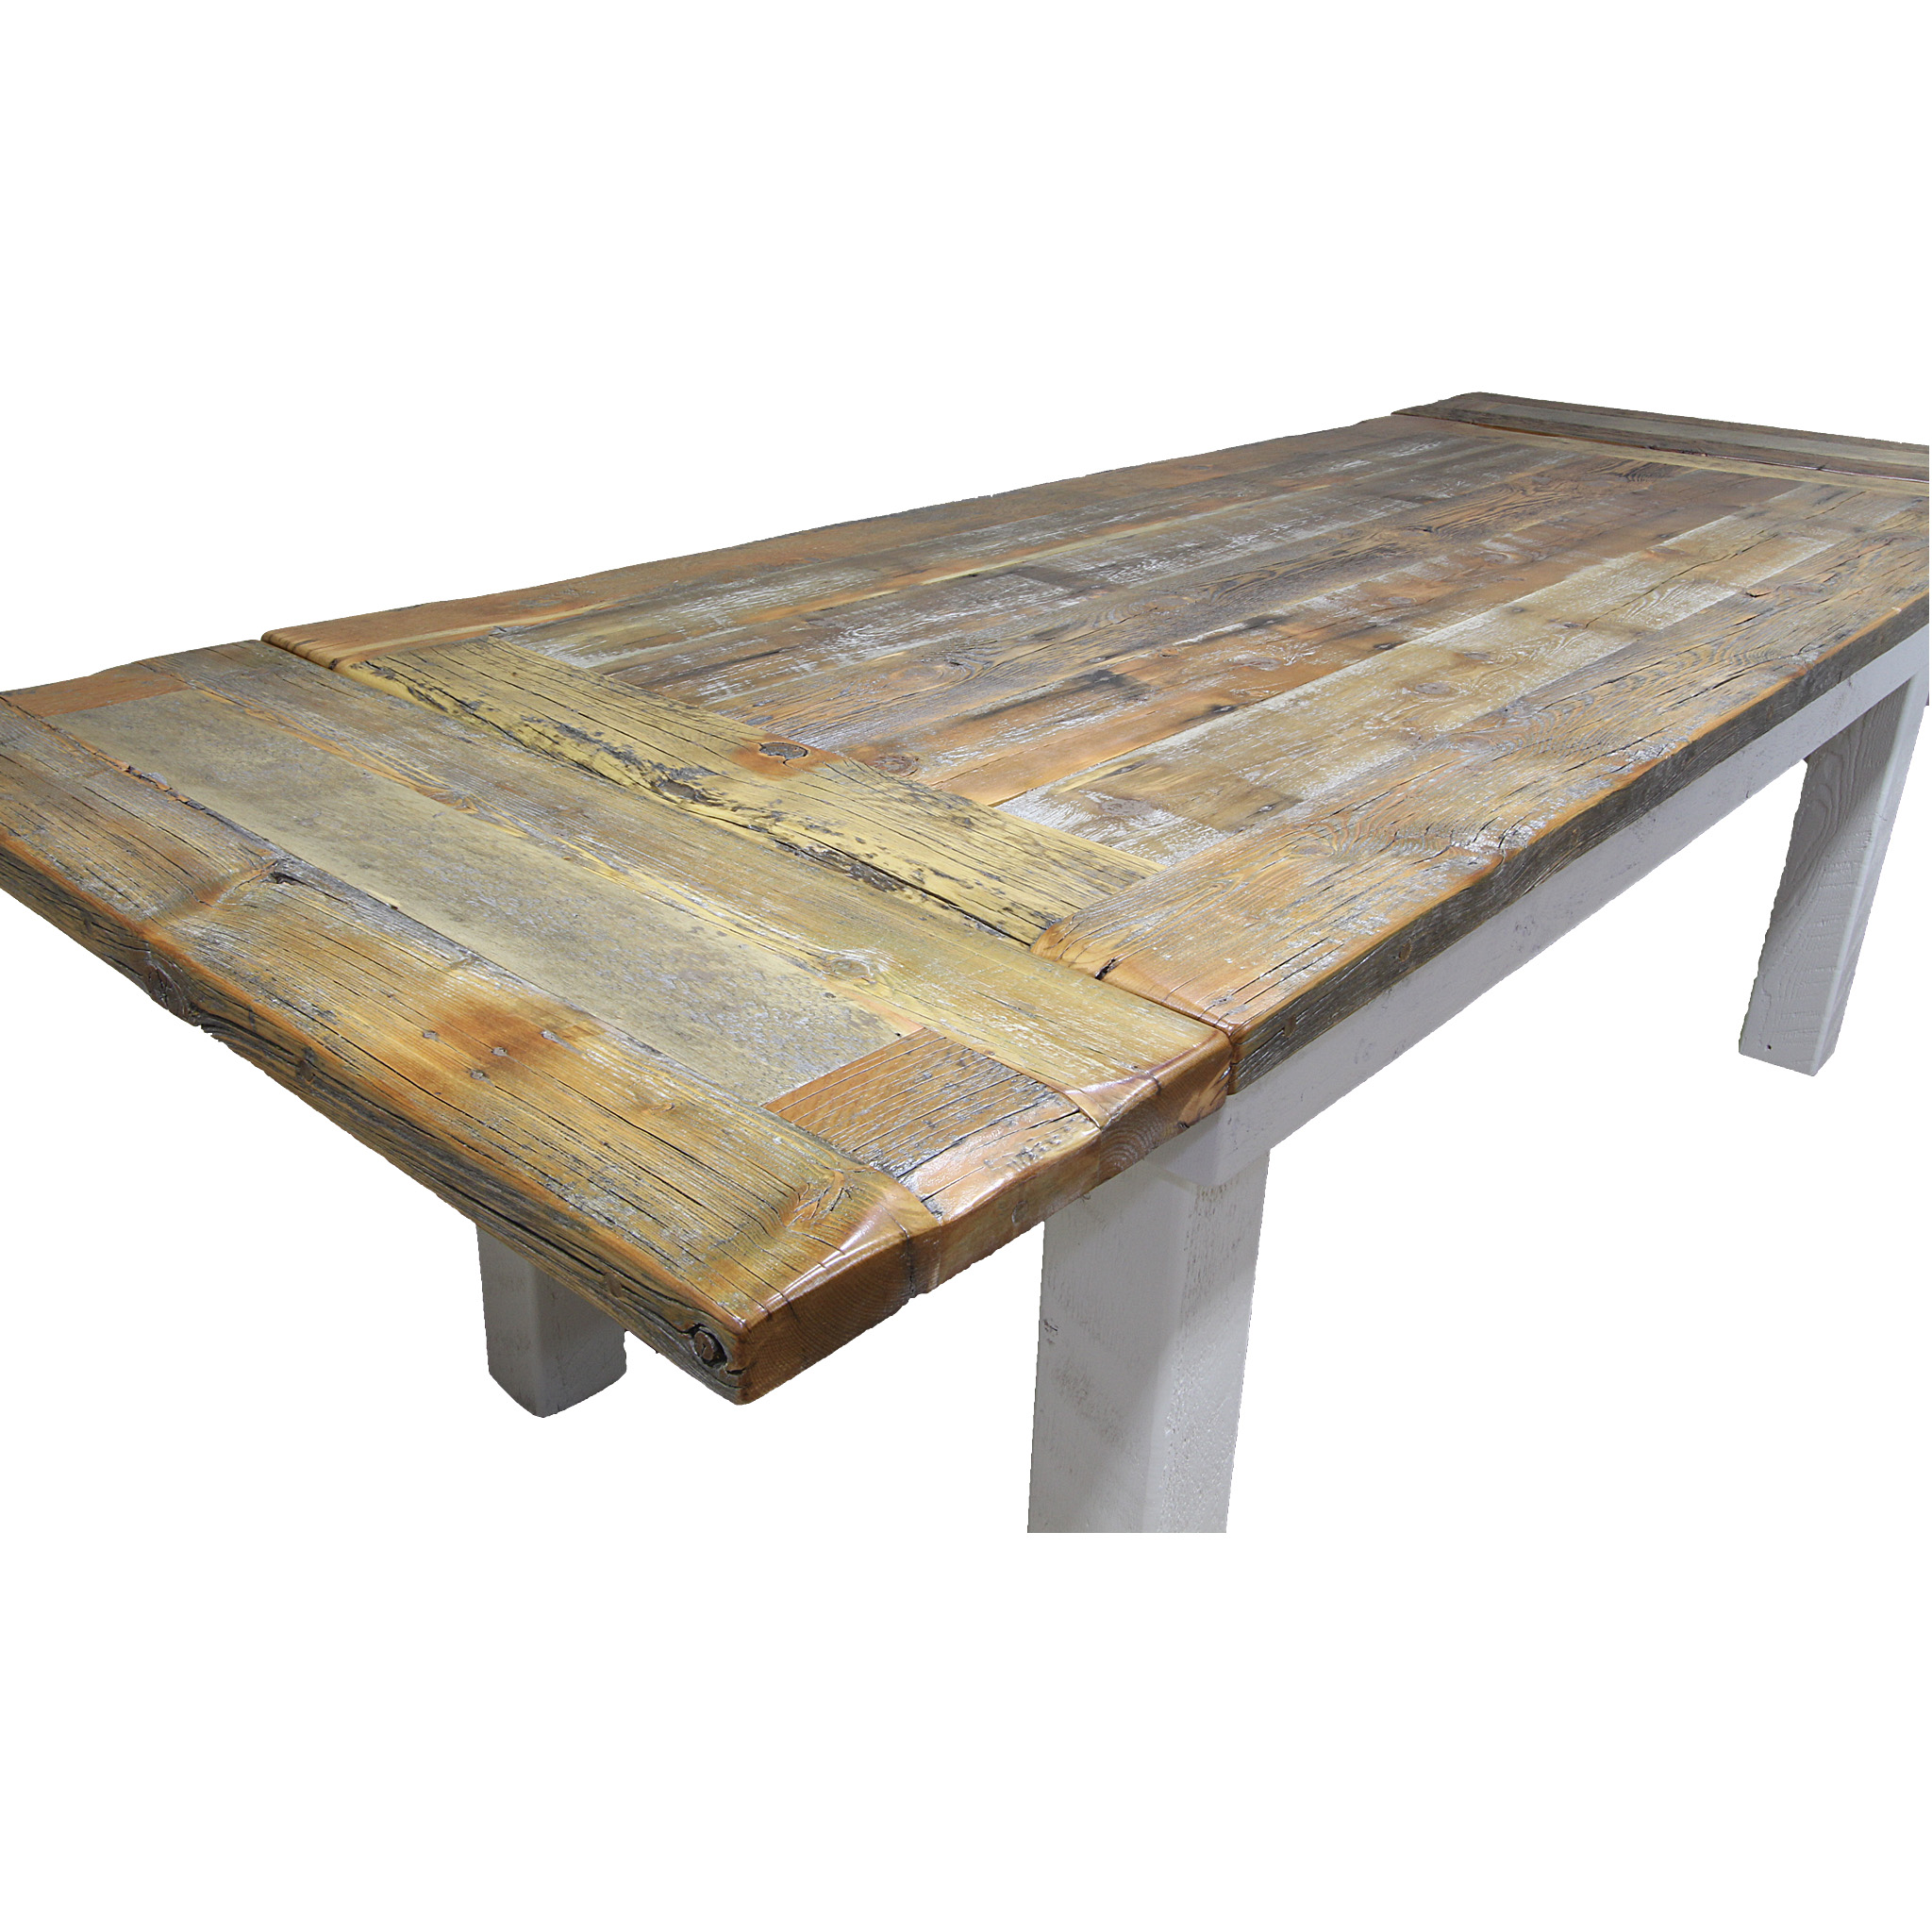 Reclaimed Farmhouse Extension Dining, Rustic Wooden Dining Tables